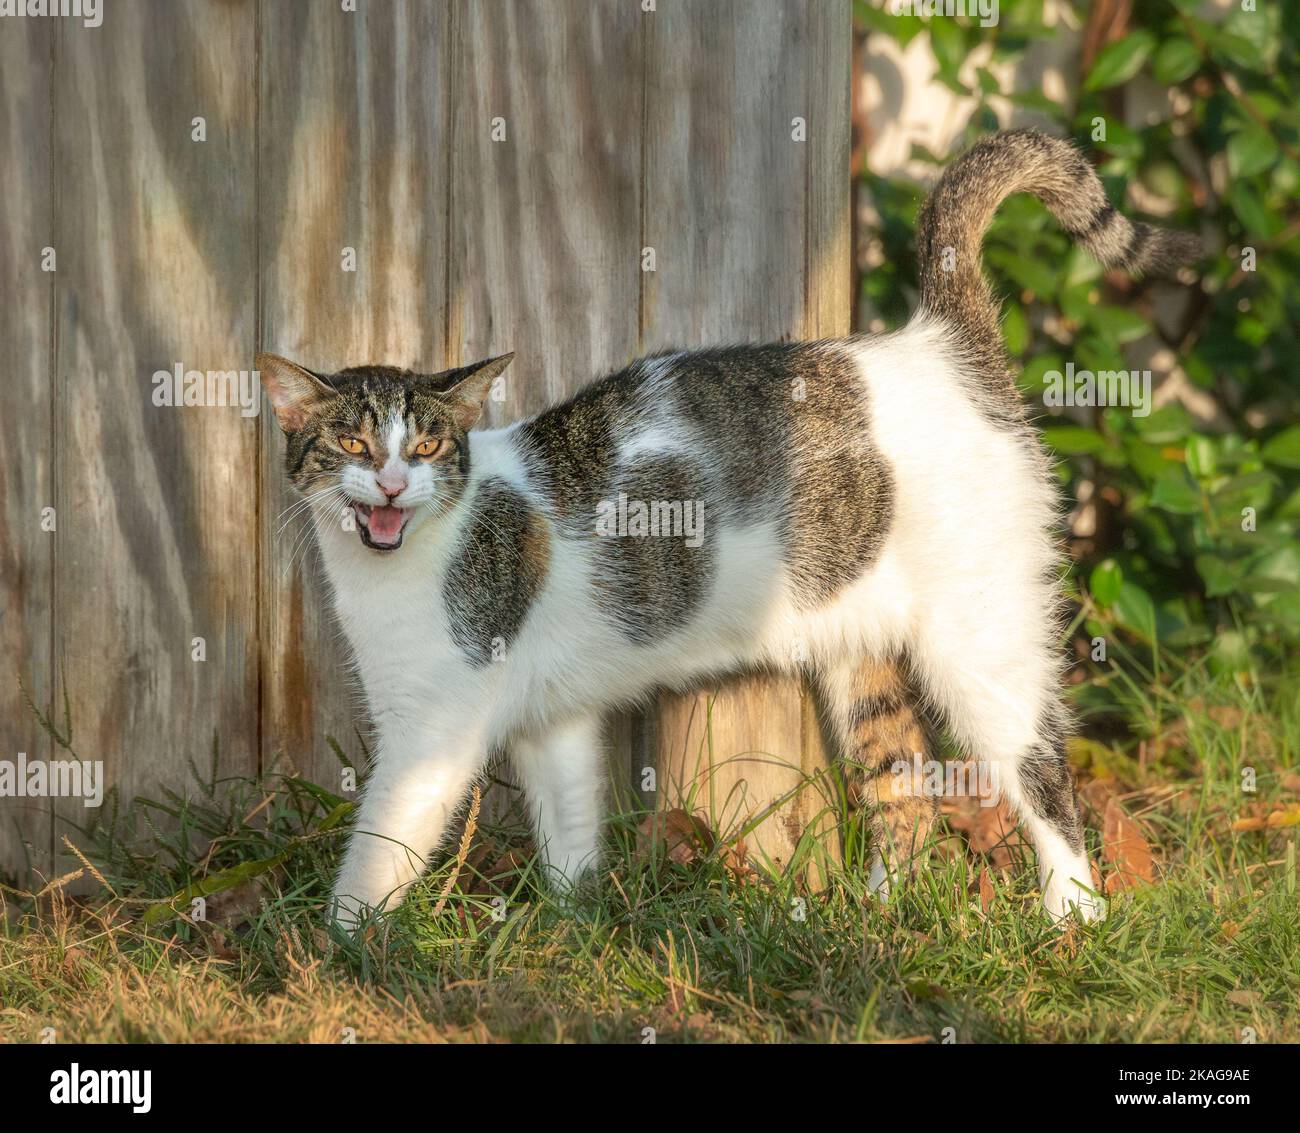 calico barn cat calling out Stock Photo